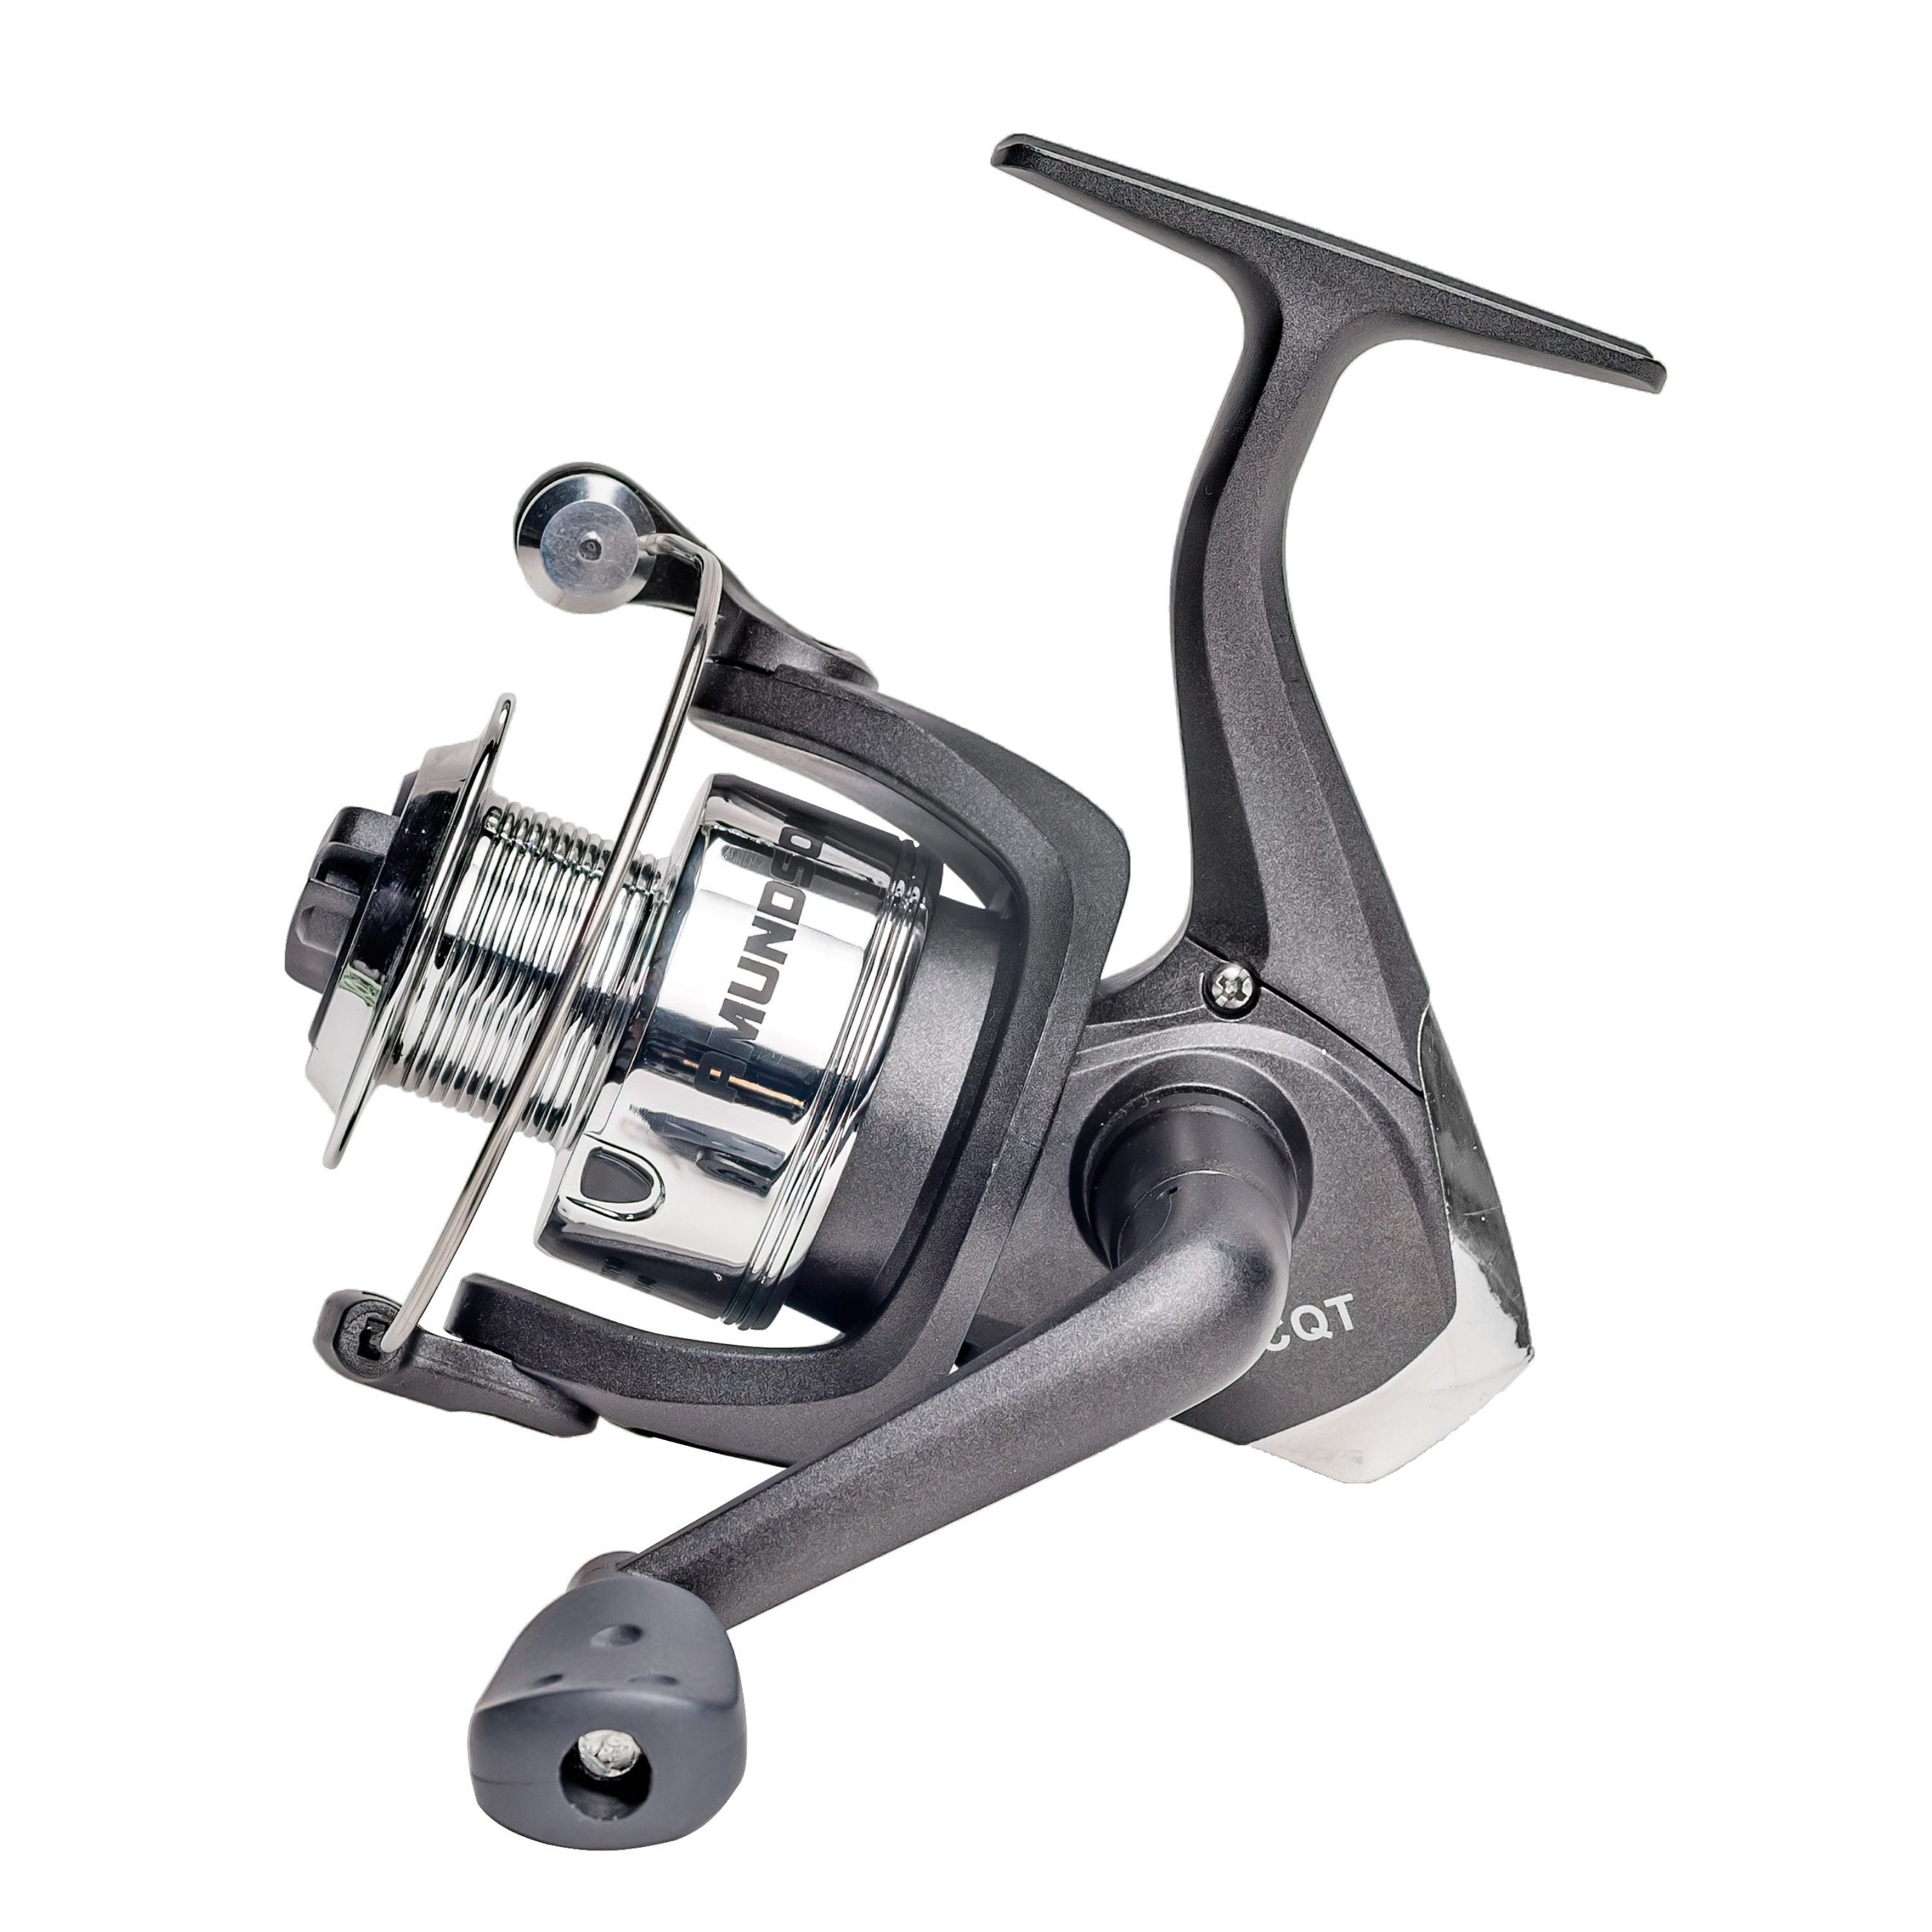 "Conquer" Spinning reel